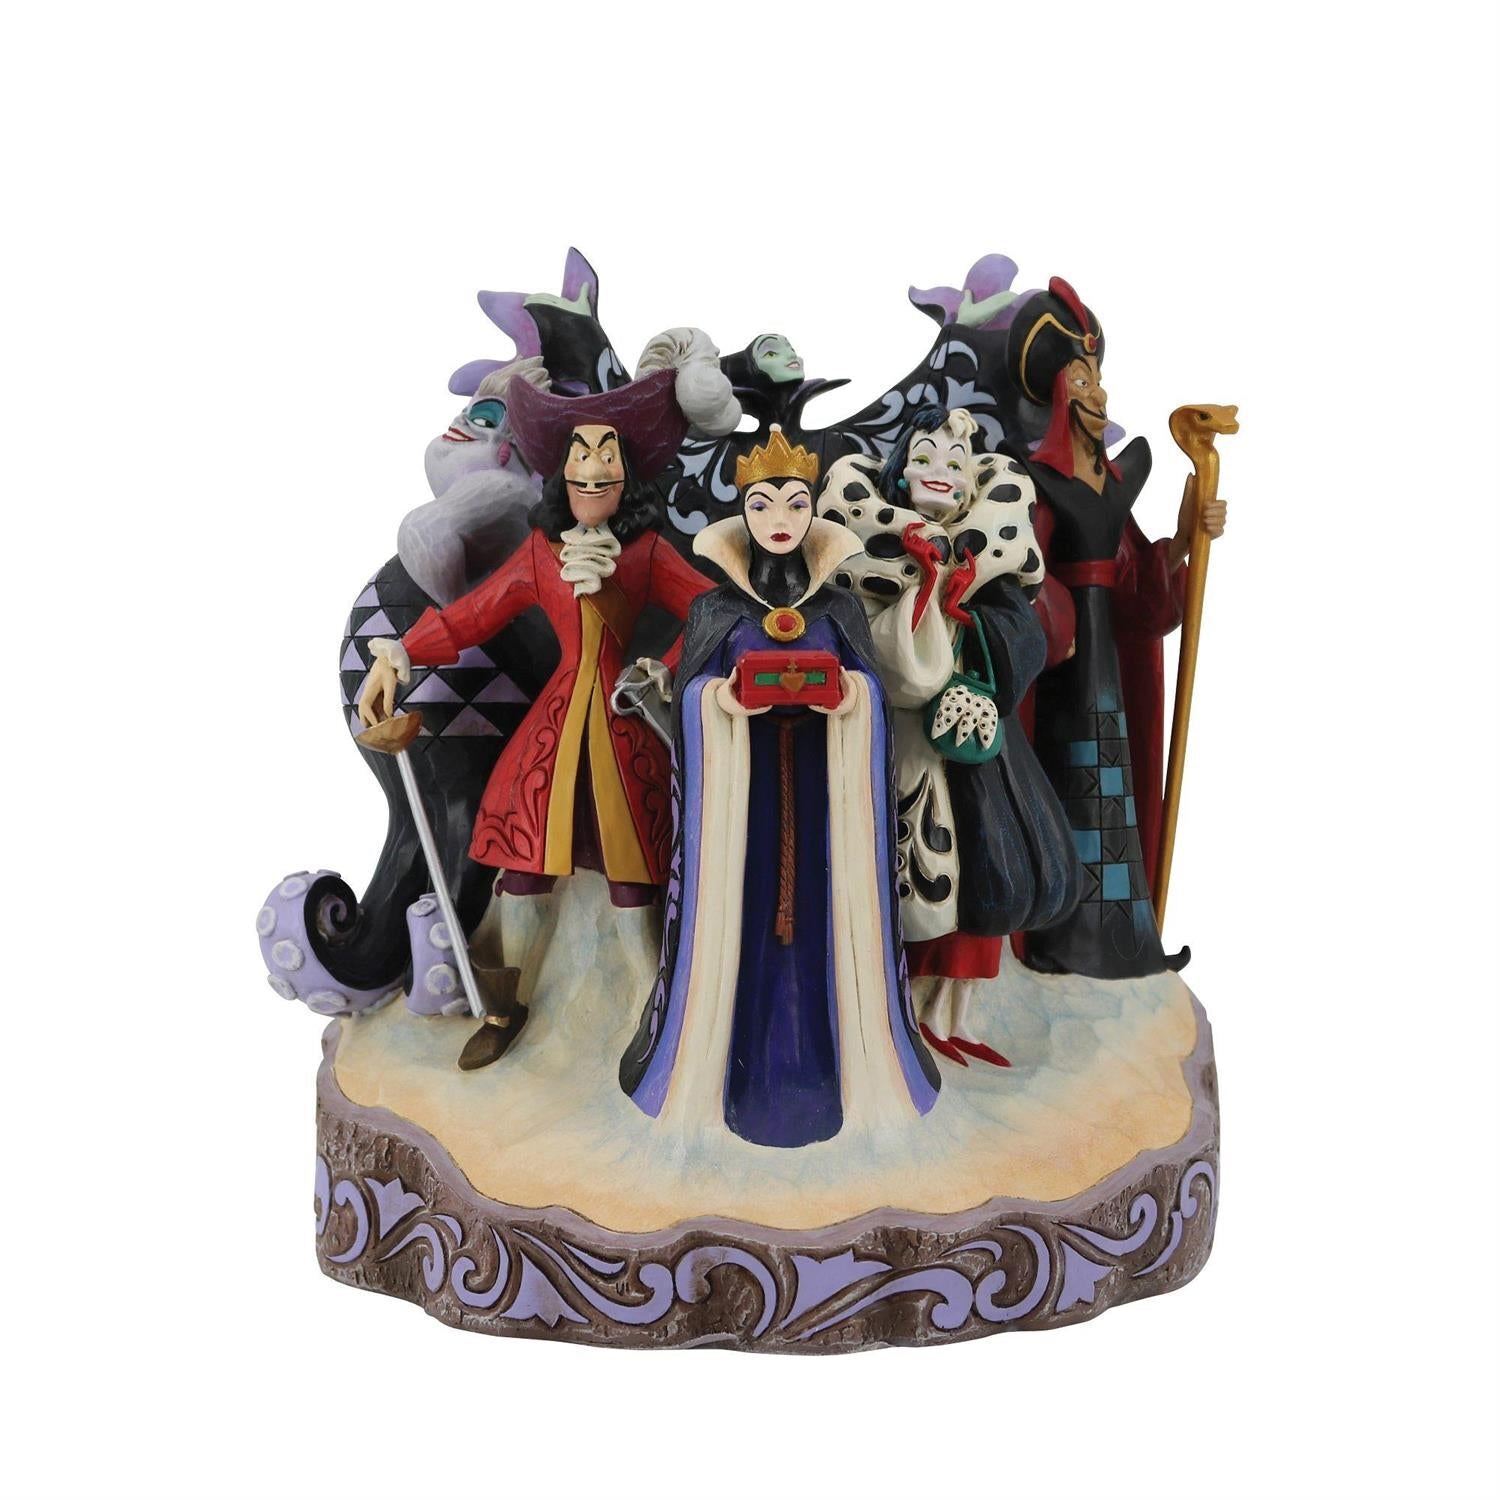 Jim Shore Disney Traditions Villains Carved by Heart Figurine 6010880